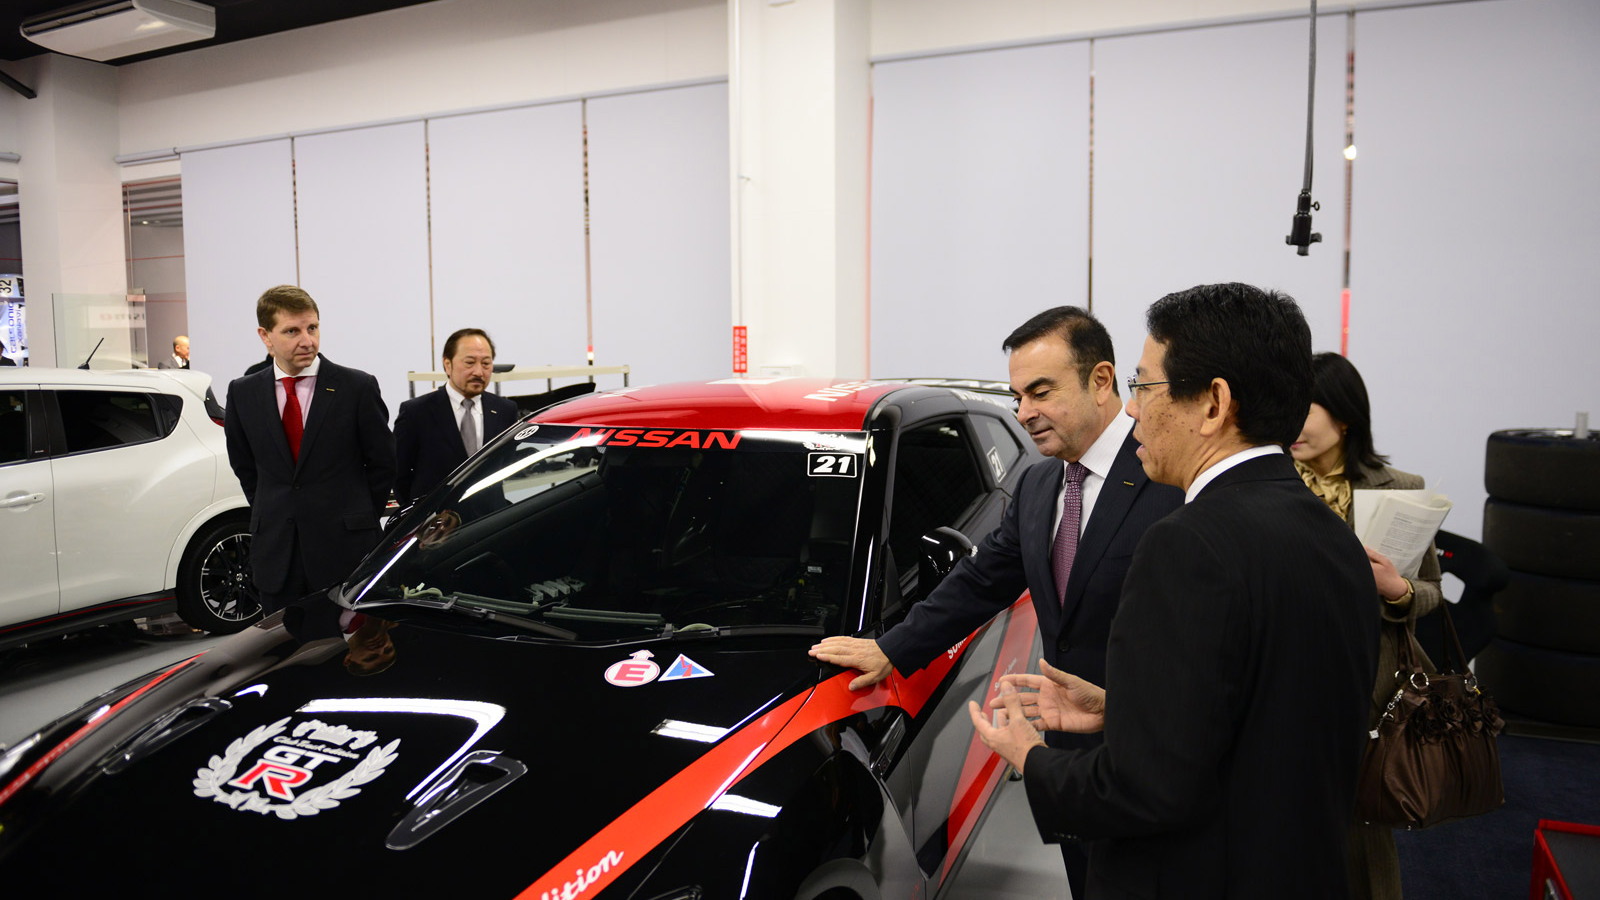 Nissan CEO Carlos Ghosn at the opening of Nismo’s new headquarters in Japan